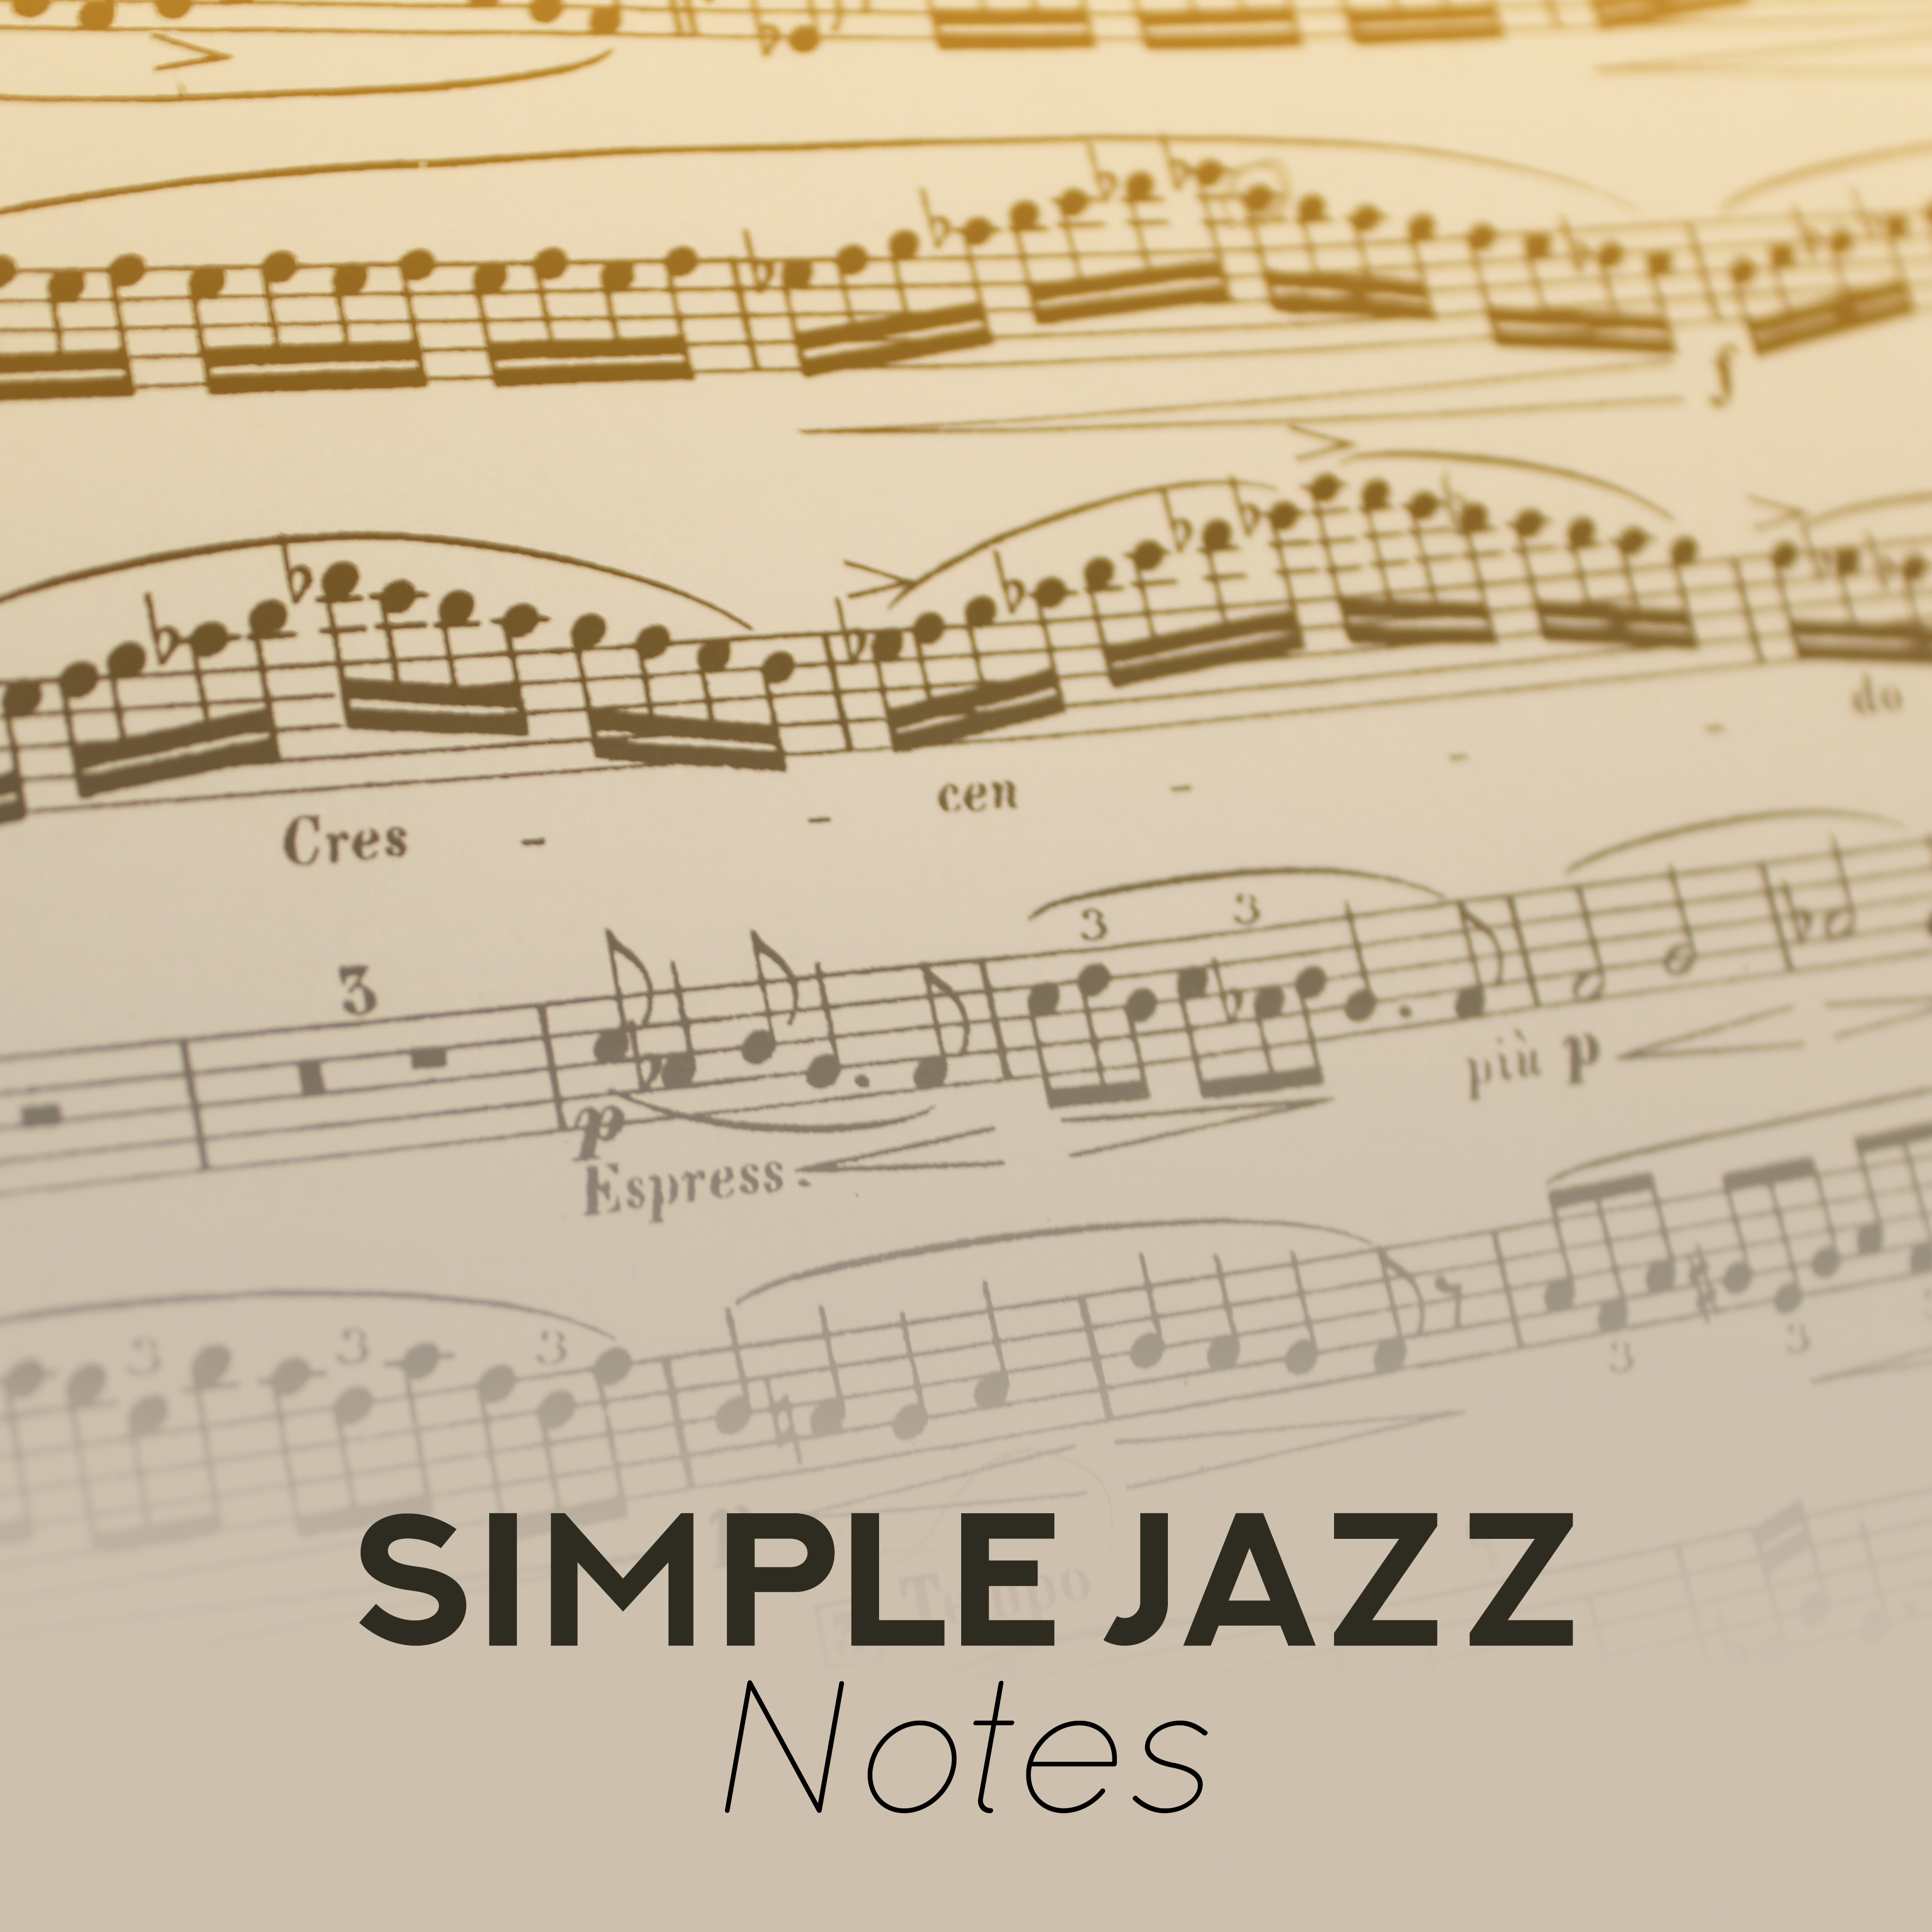 Simple Jazz Notes